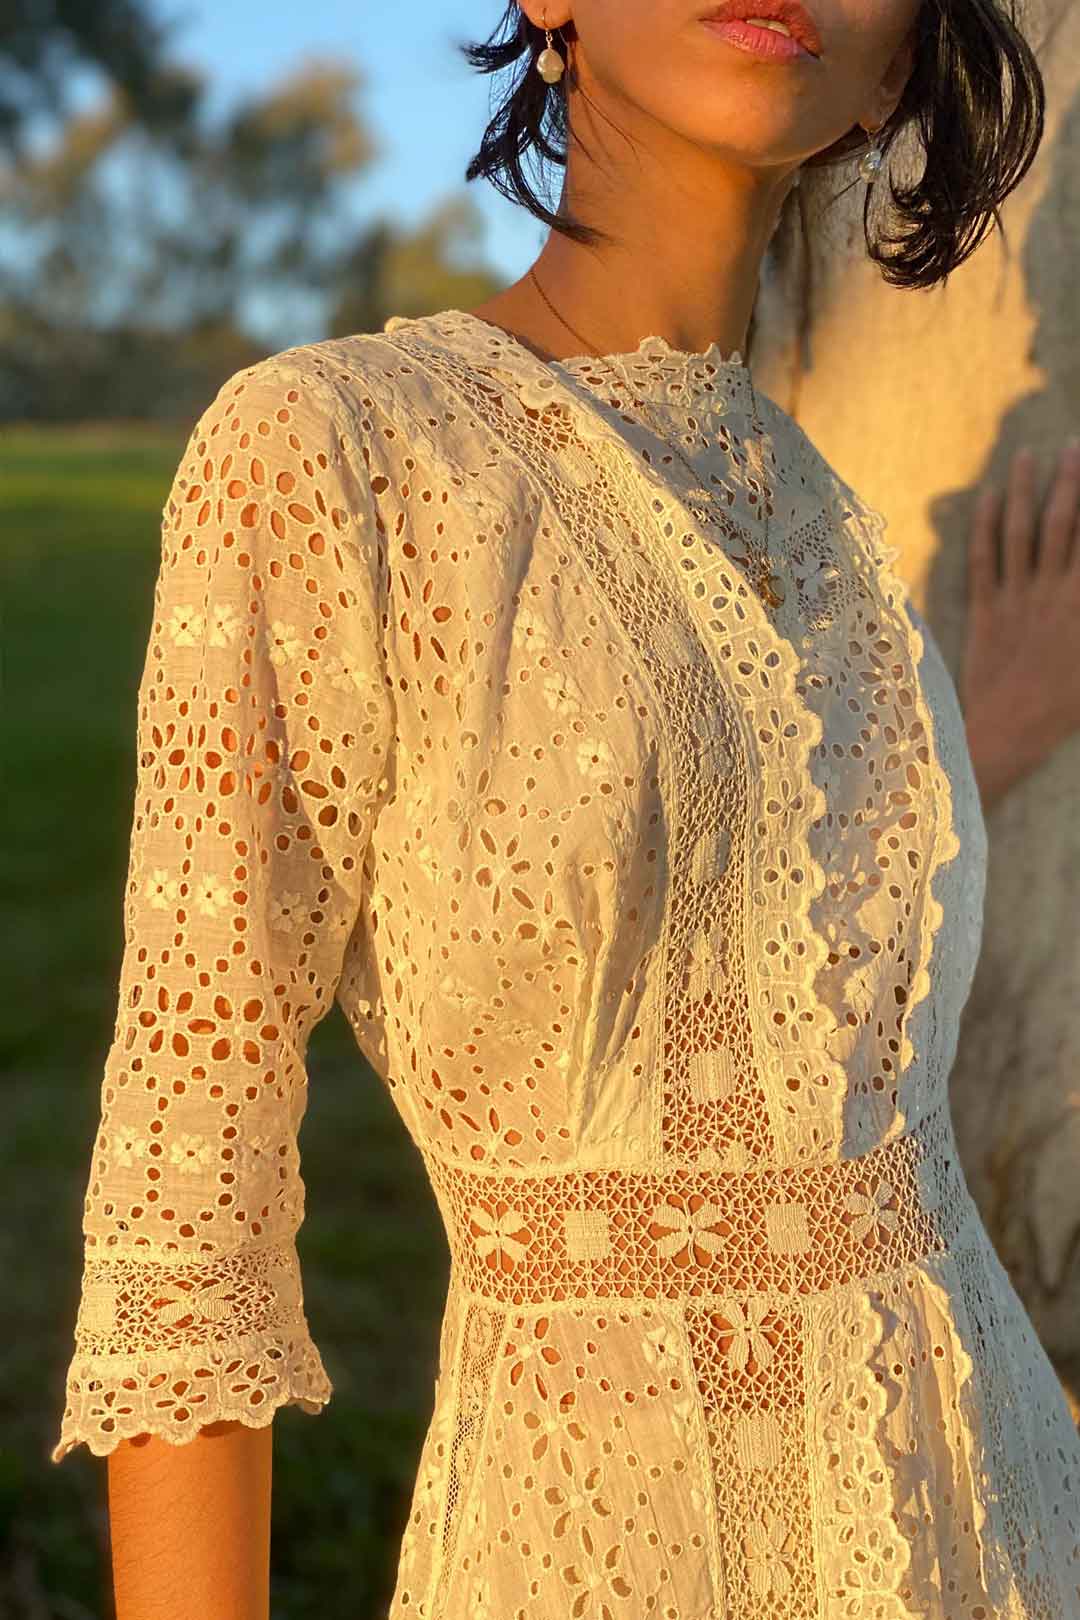 Early 1900s Antique Cotton Eyelet & Lace Dress XS/S